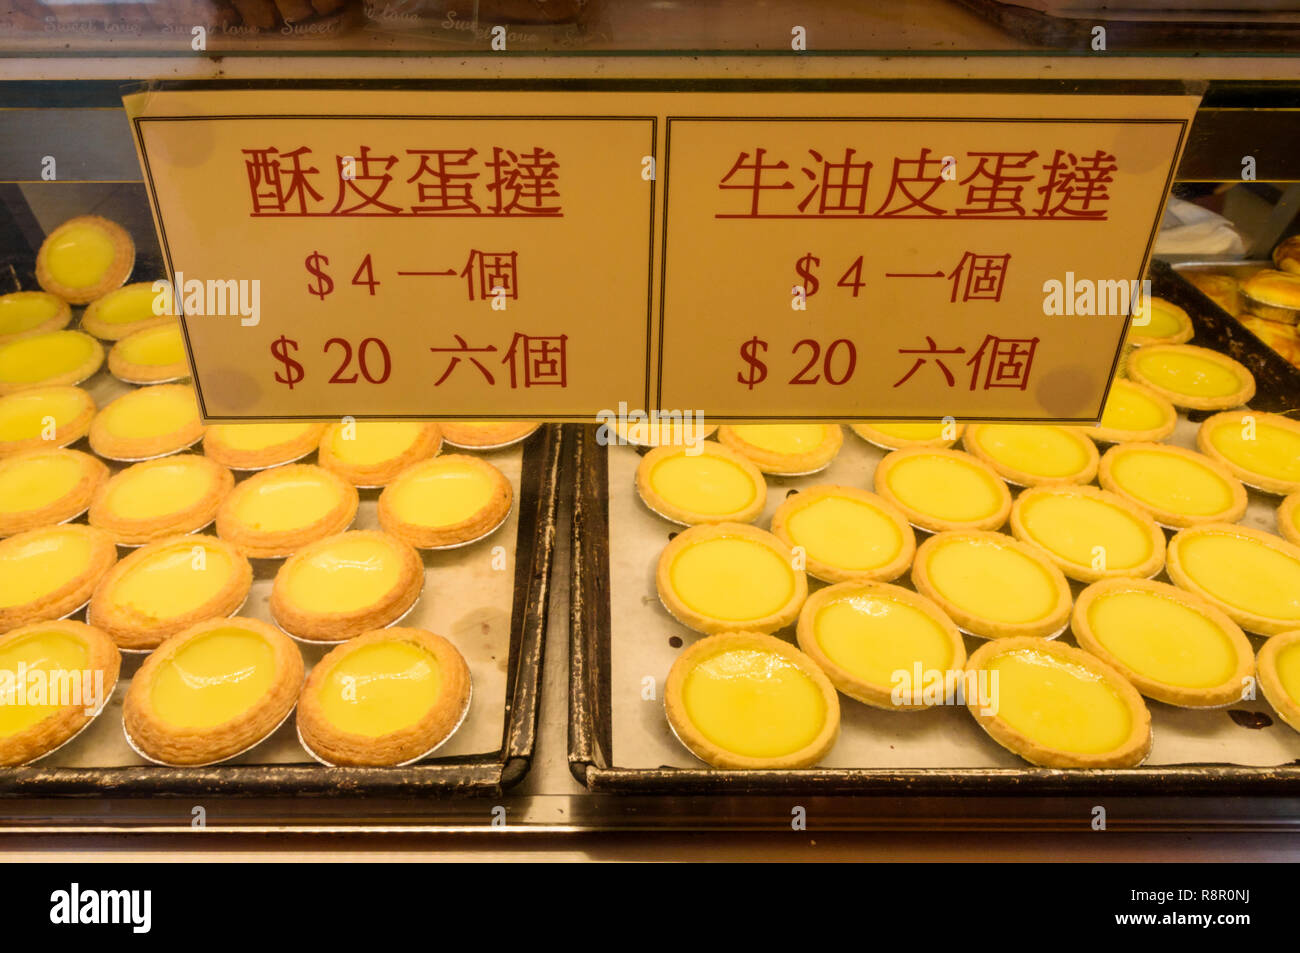 Different types of egg tarts for sale at the Red Cherry Bakery in Sham Shui Po, Hong Kong Stock Photo